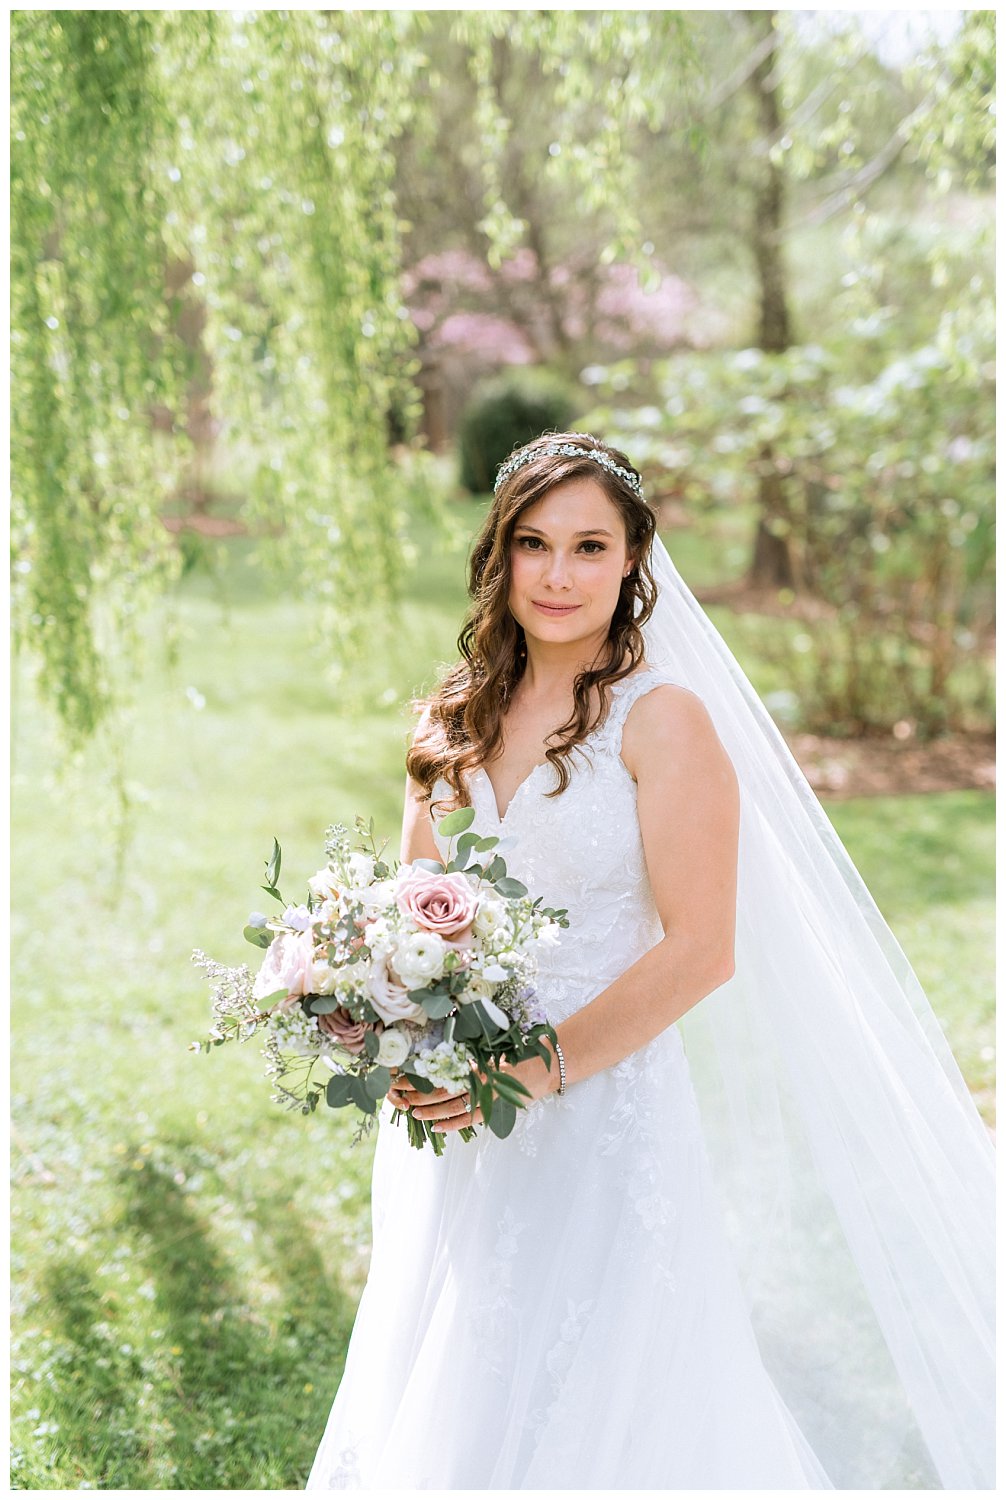 Bridal portraits at Spring Wedding at The Market at Grelen photographed by Heather Dodge Photography